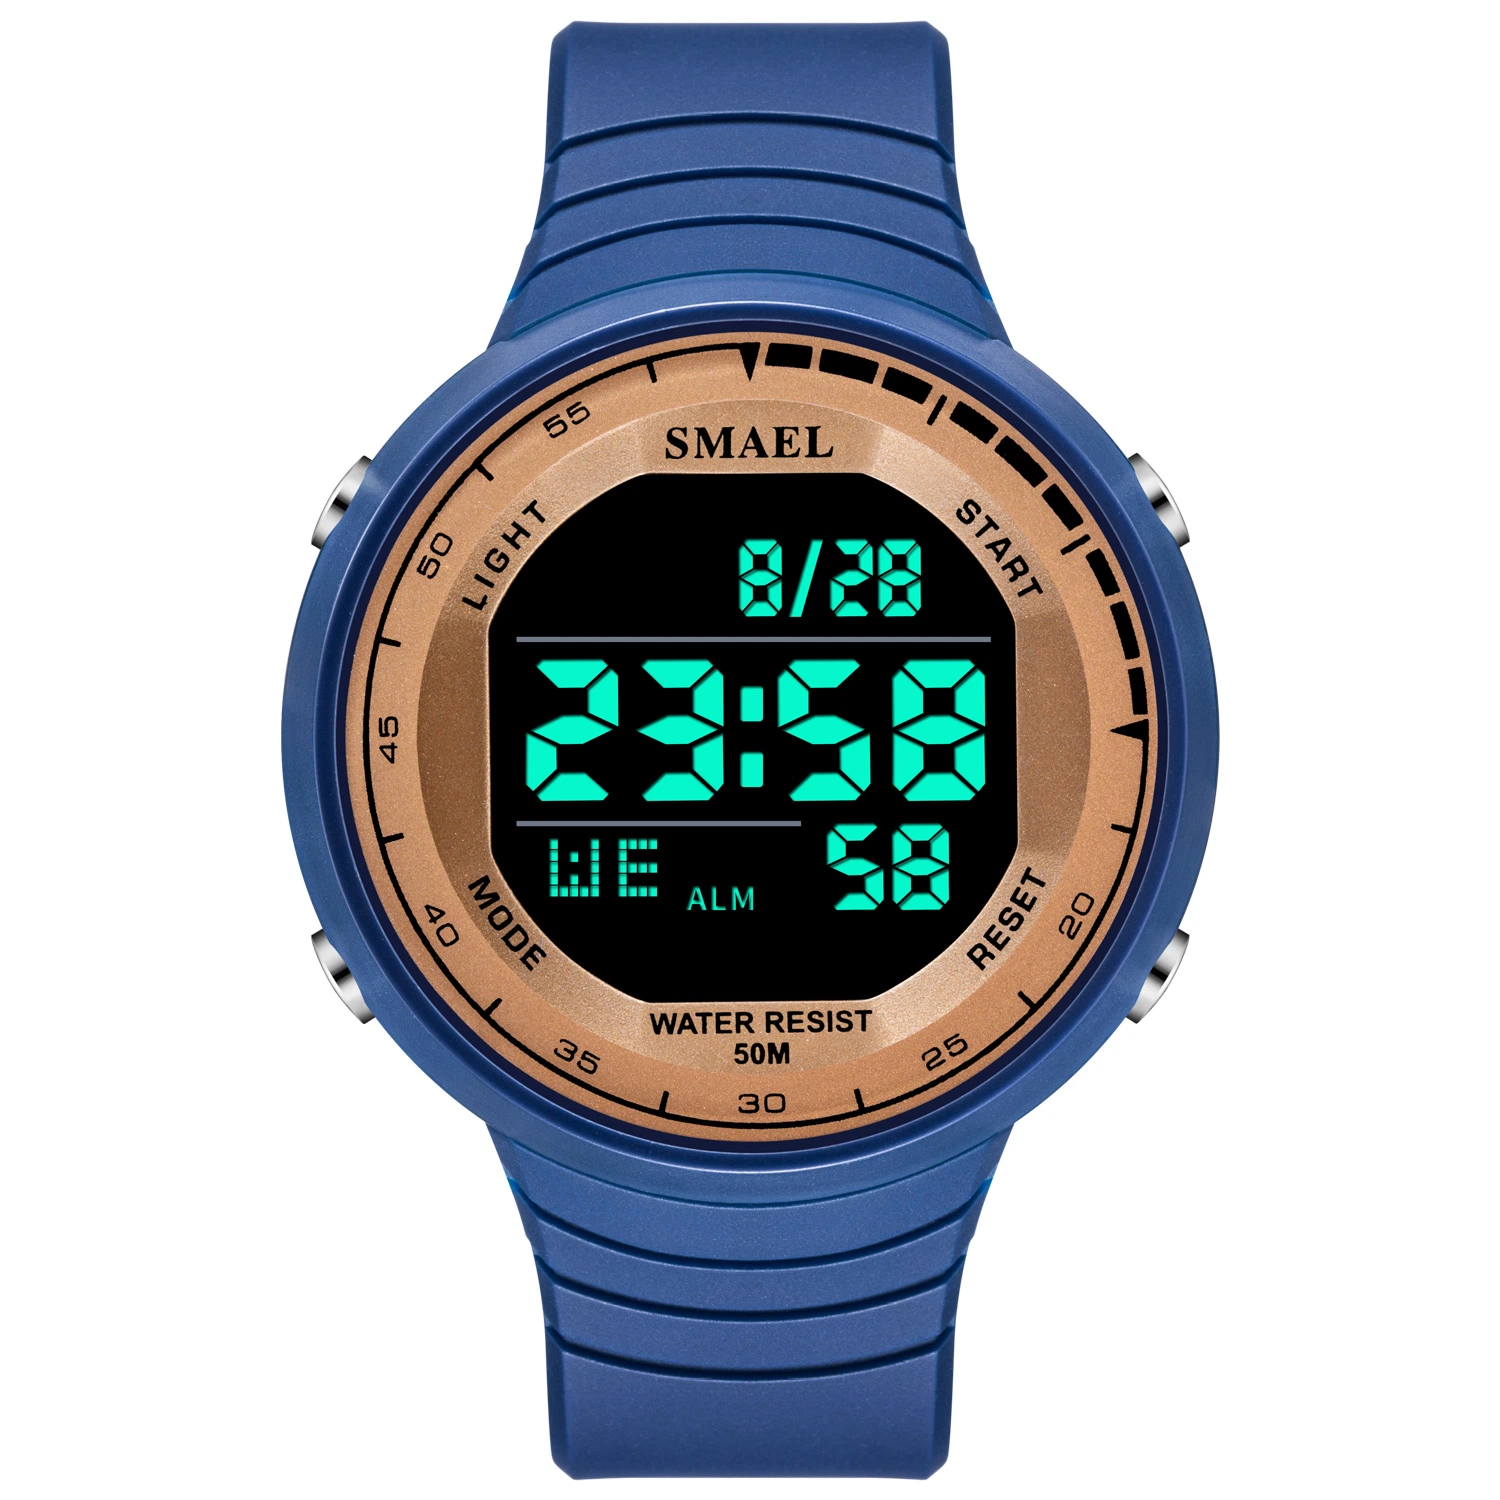 Blue Color Wholesale Men Digital Sports Watches LED Outdoor Dress Wristwatche Watch 50m Water Resistant Watches